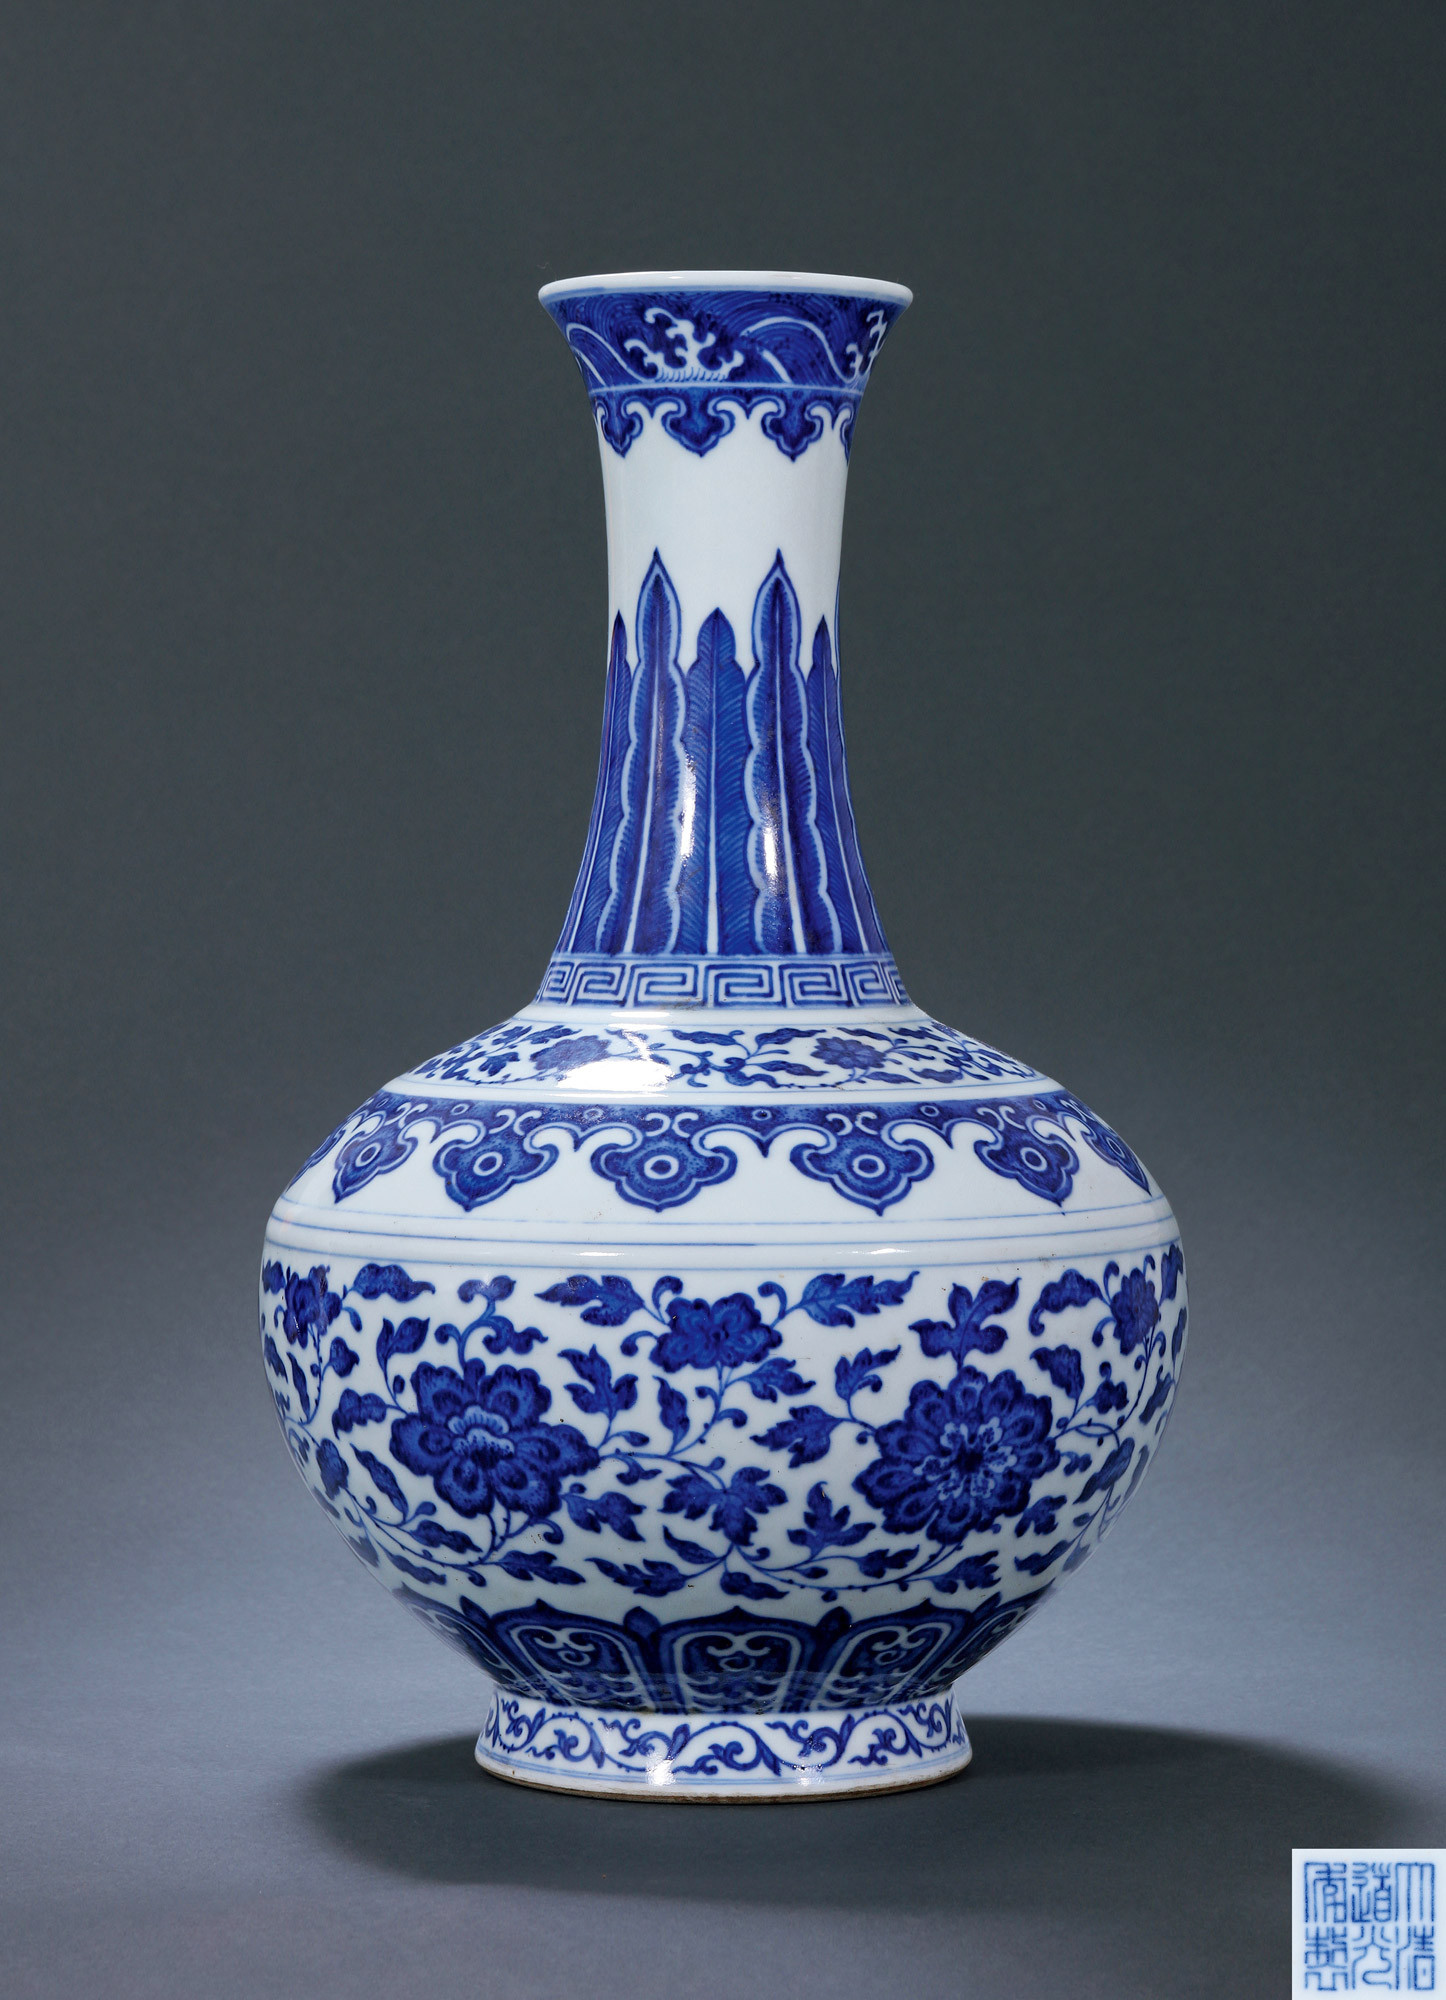 A BLUE AND WHITE VASE WITH FLOWERS DESIGN